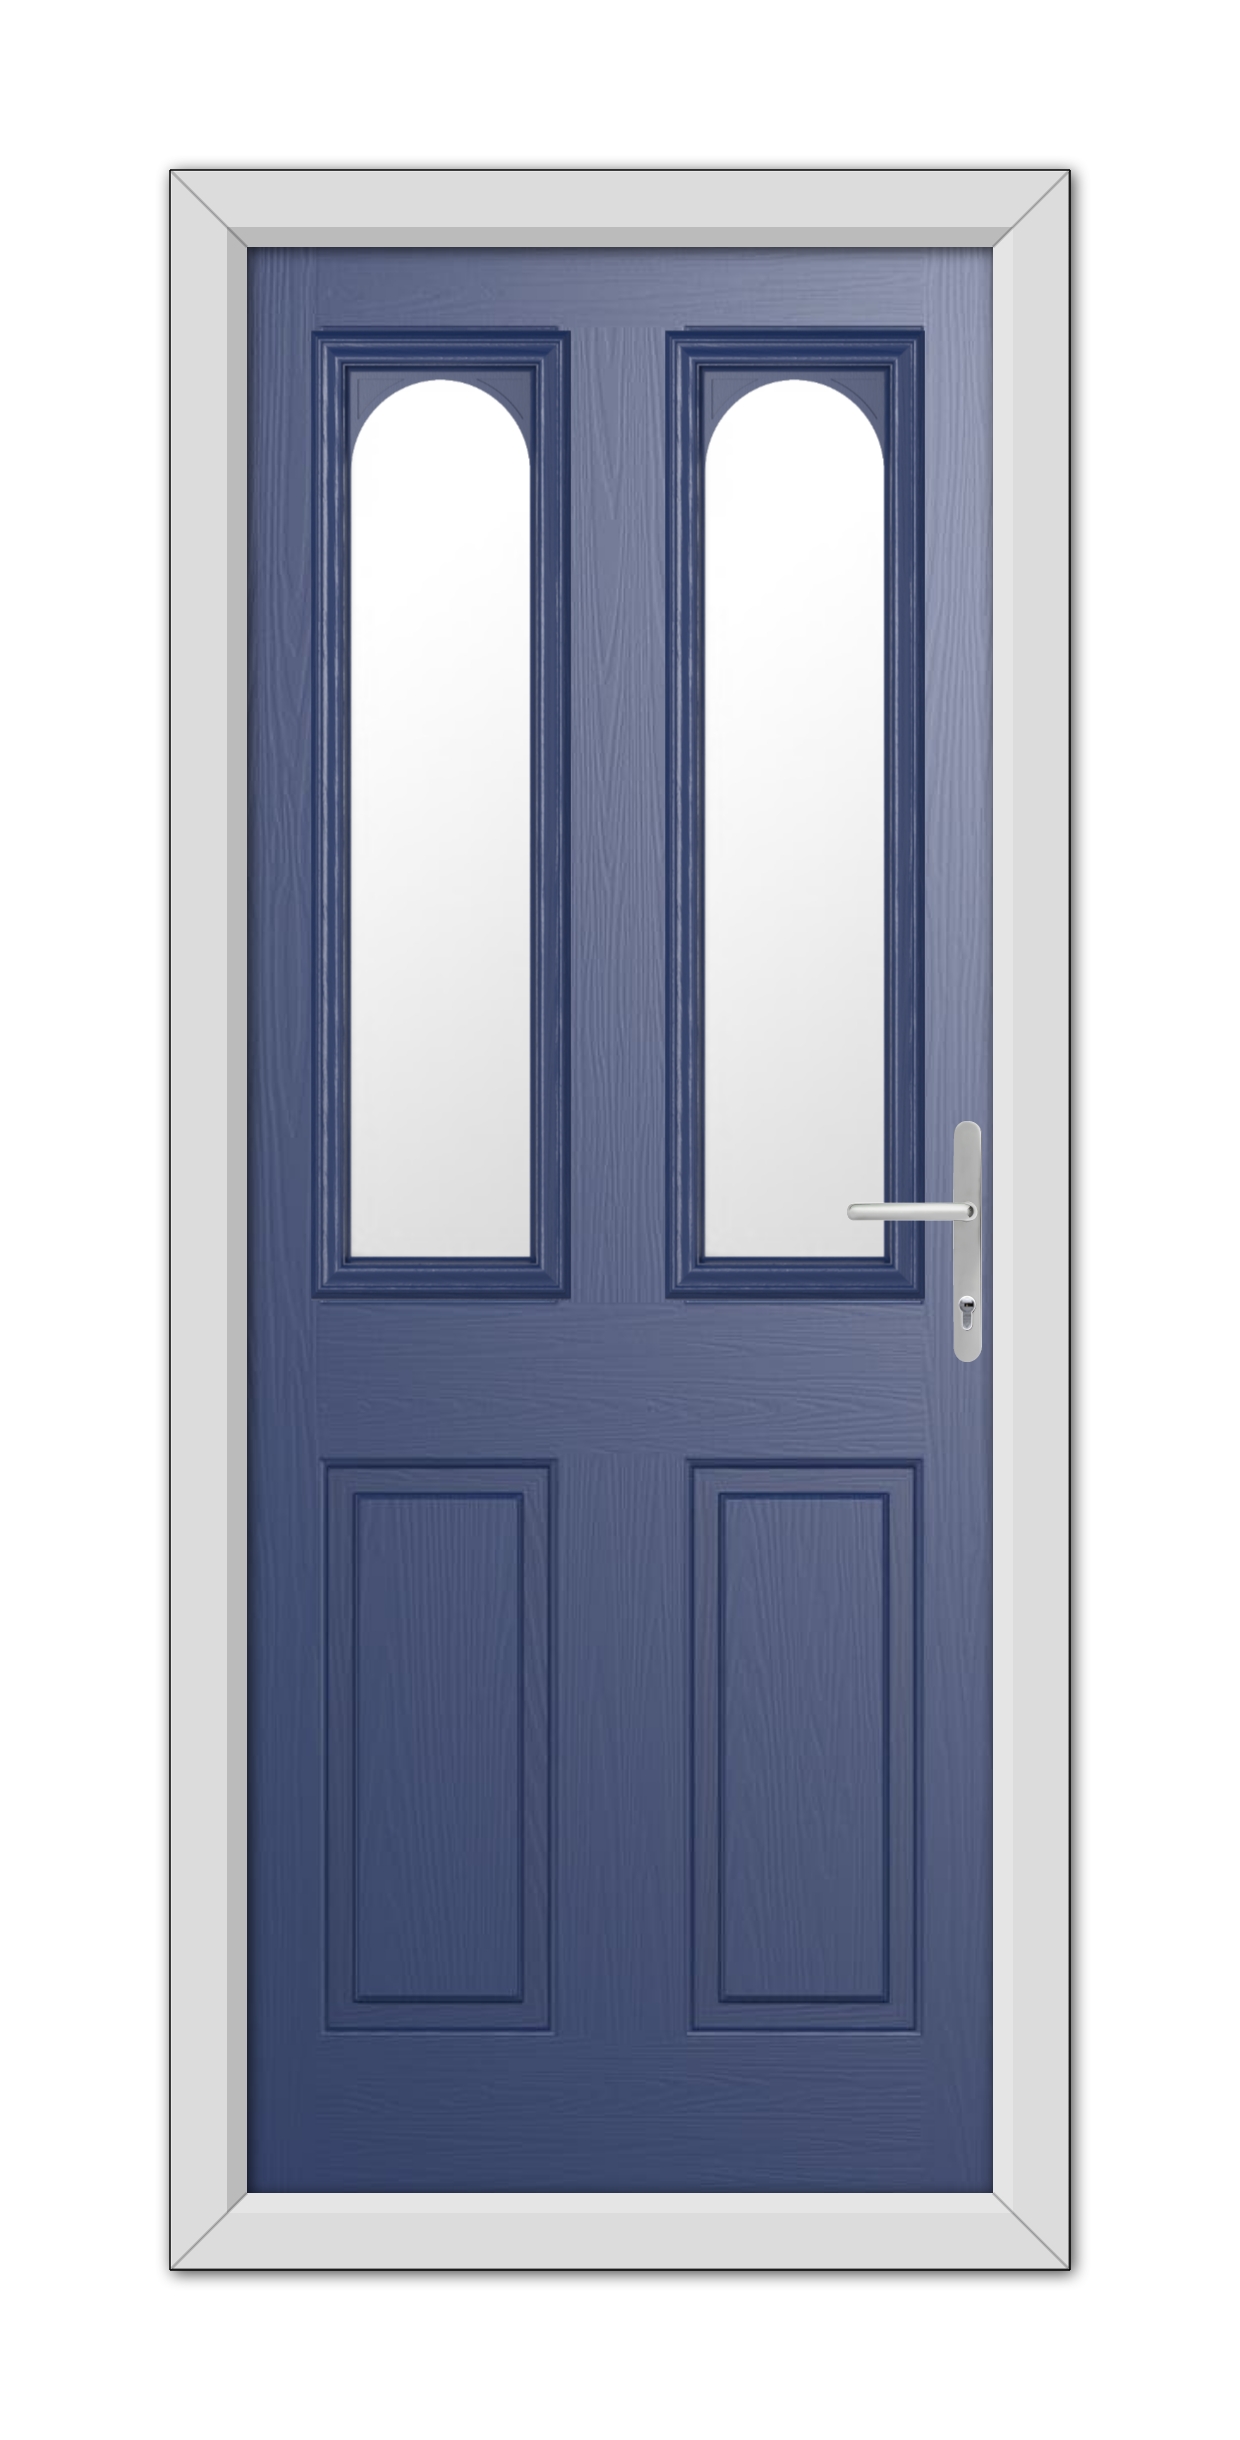 A modern Blue Elmhurst Composite Door 48mm Timber Core with white trim and long, vertical glass panels.